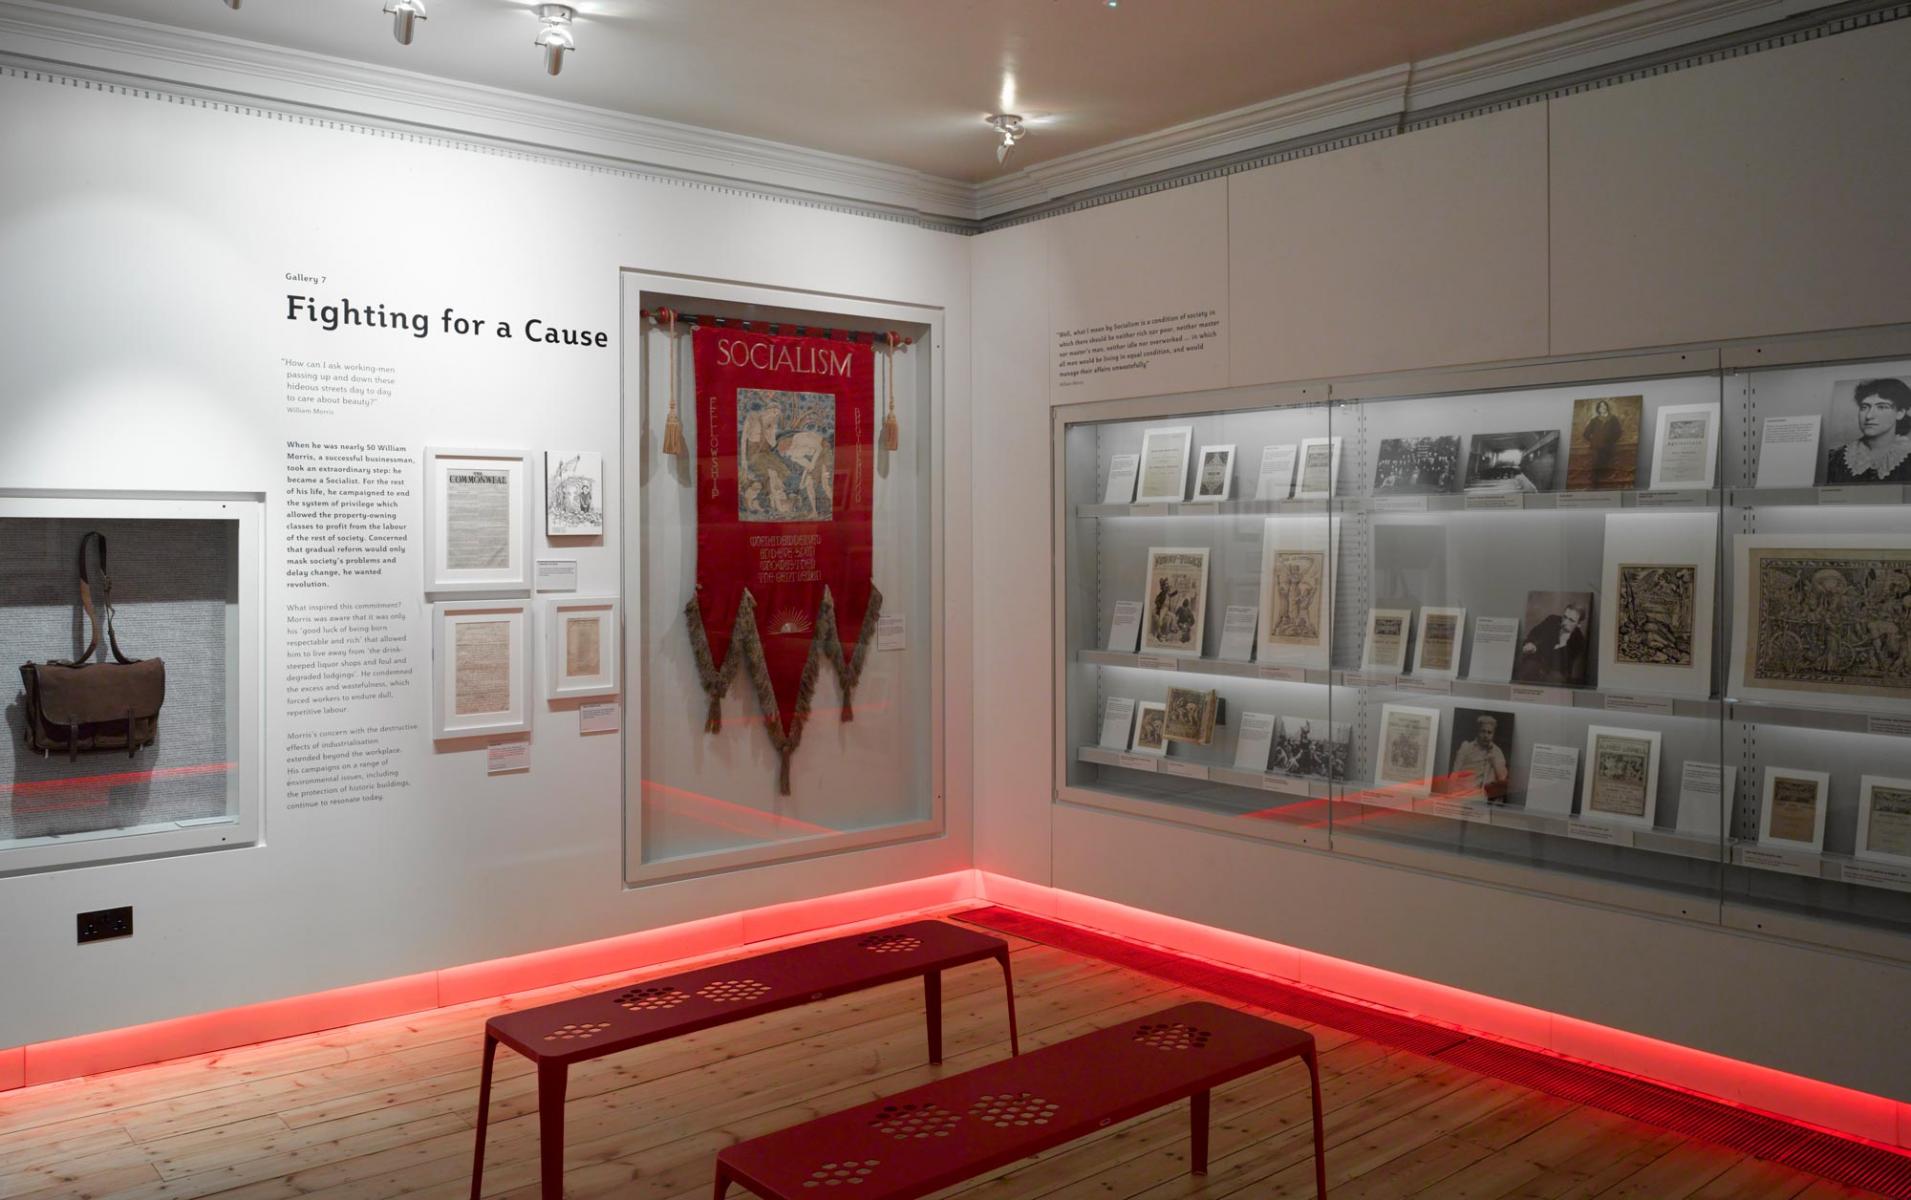 William Morris Gallery, Walthamstow, London - Fighting for a Cause